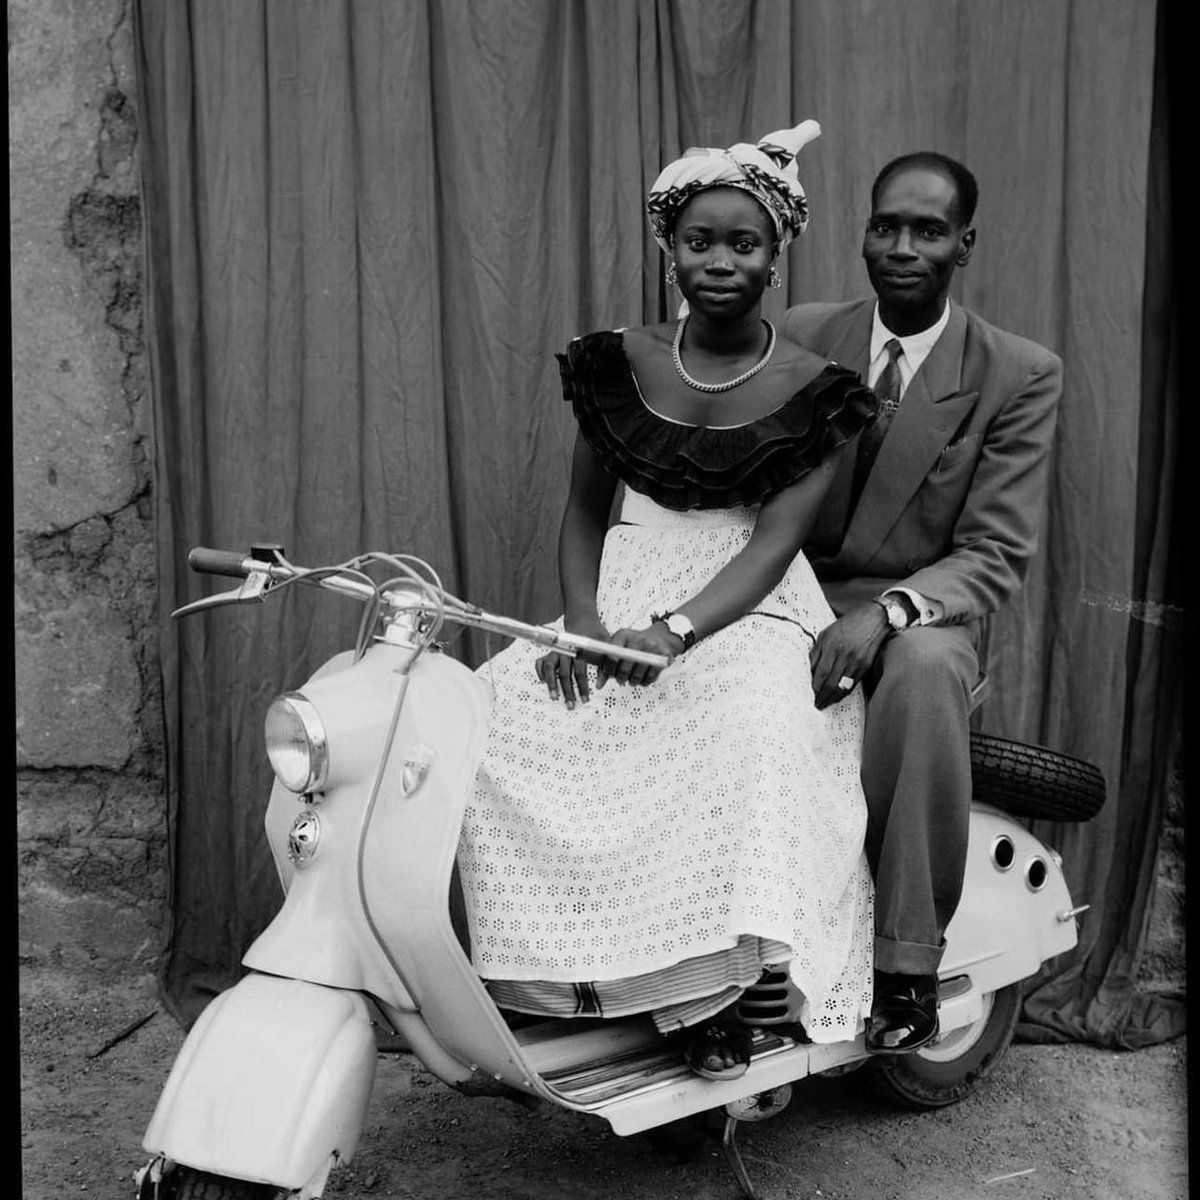 Today's muse is Seydou Keïta, a Malian self-taught photographer known for his portraits he took at his photography studio in the 1950s. Keïta garnered a reputation for his style of photography and his great sense of aesthetics. #todaysmuse #museandmuseums #seydoukeïta #blackart